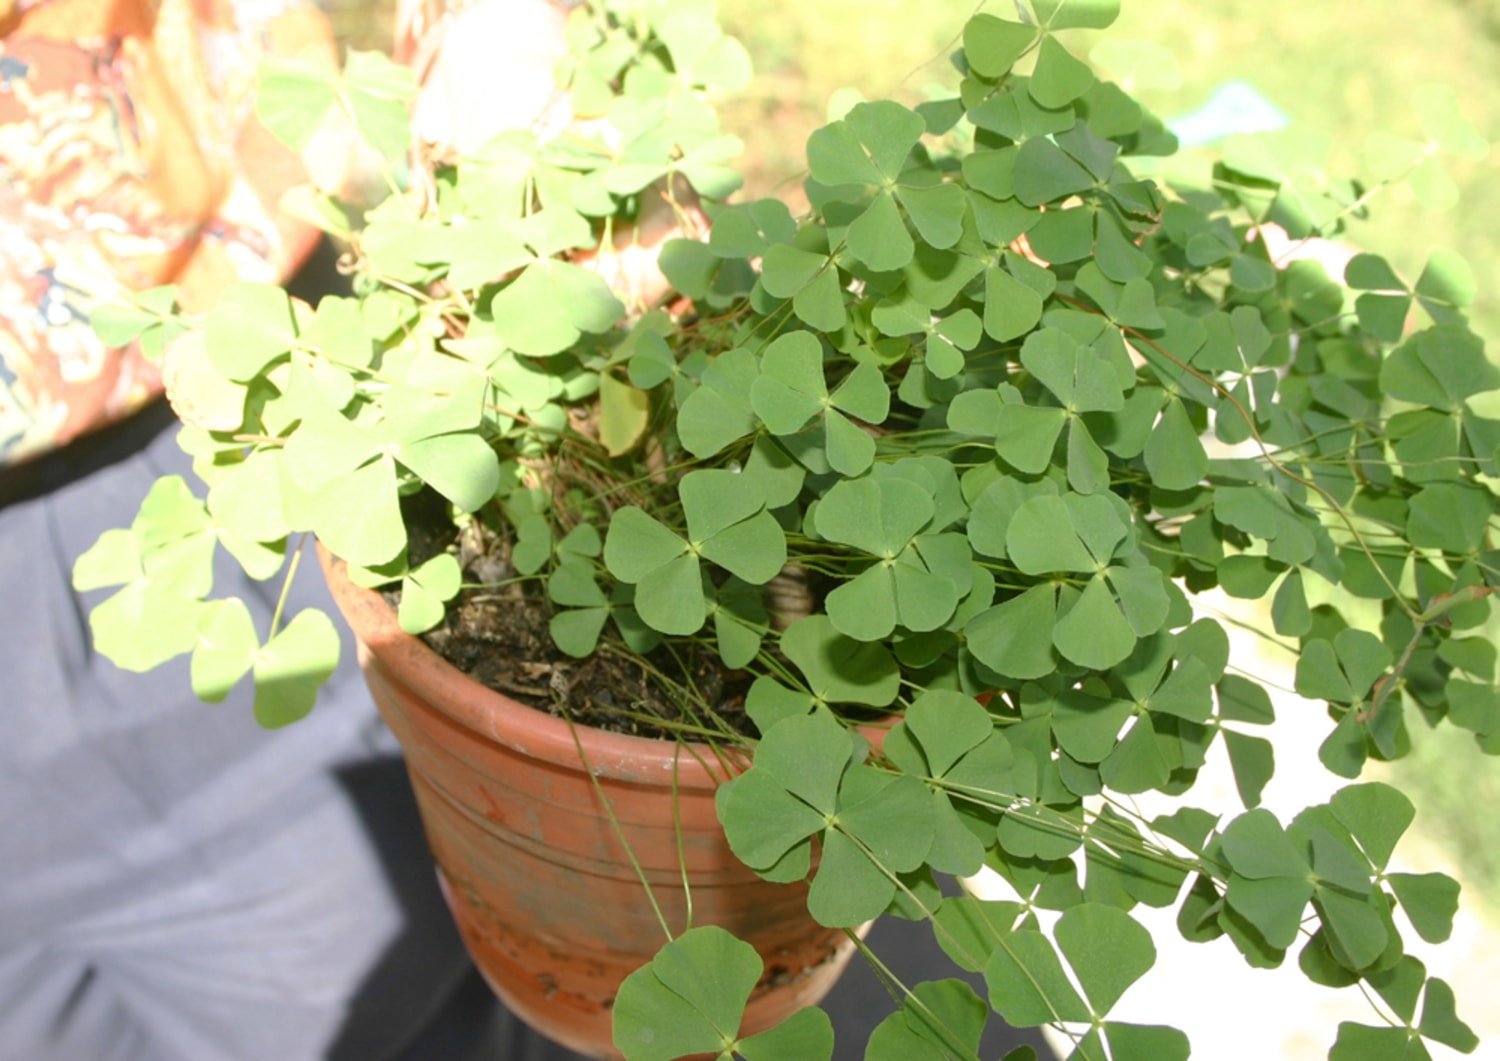 About Four Leaf Clovers - Reasons For Finding A Clover With Four Leaves